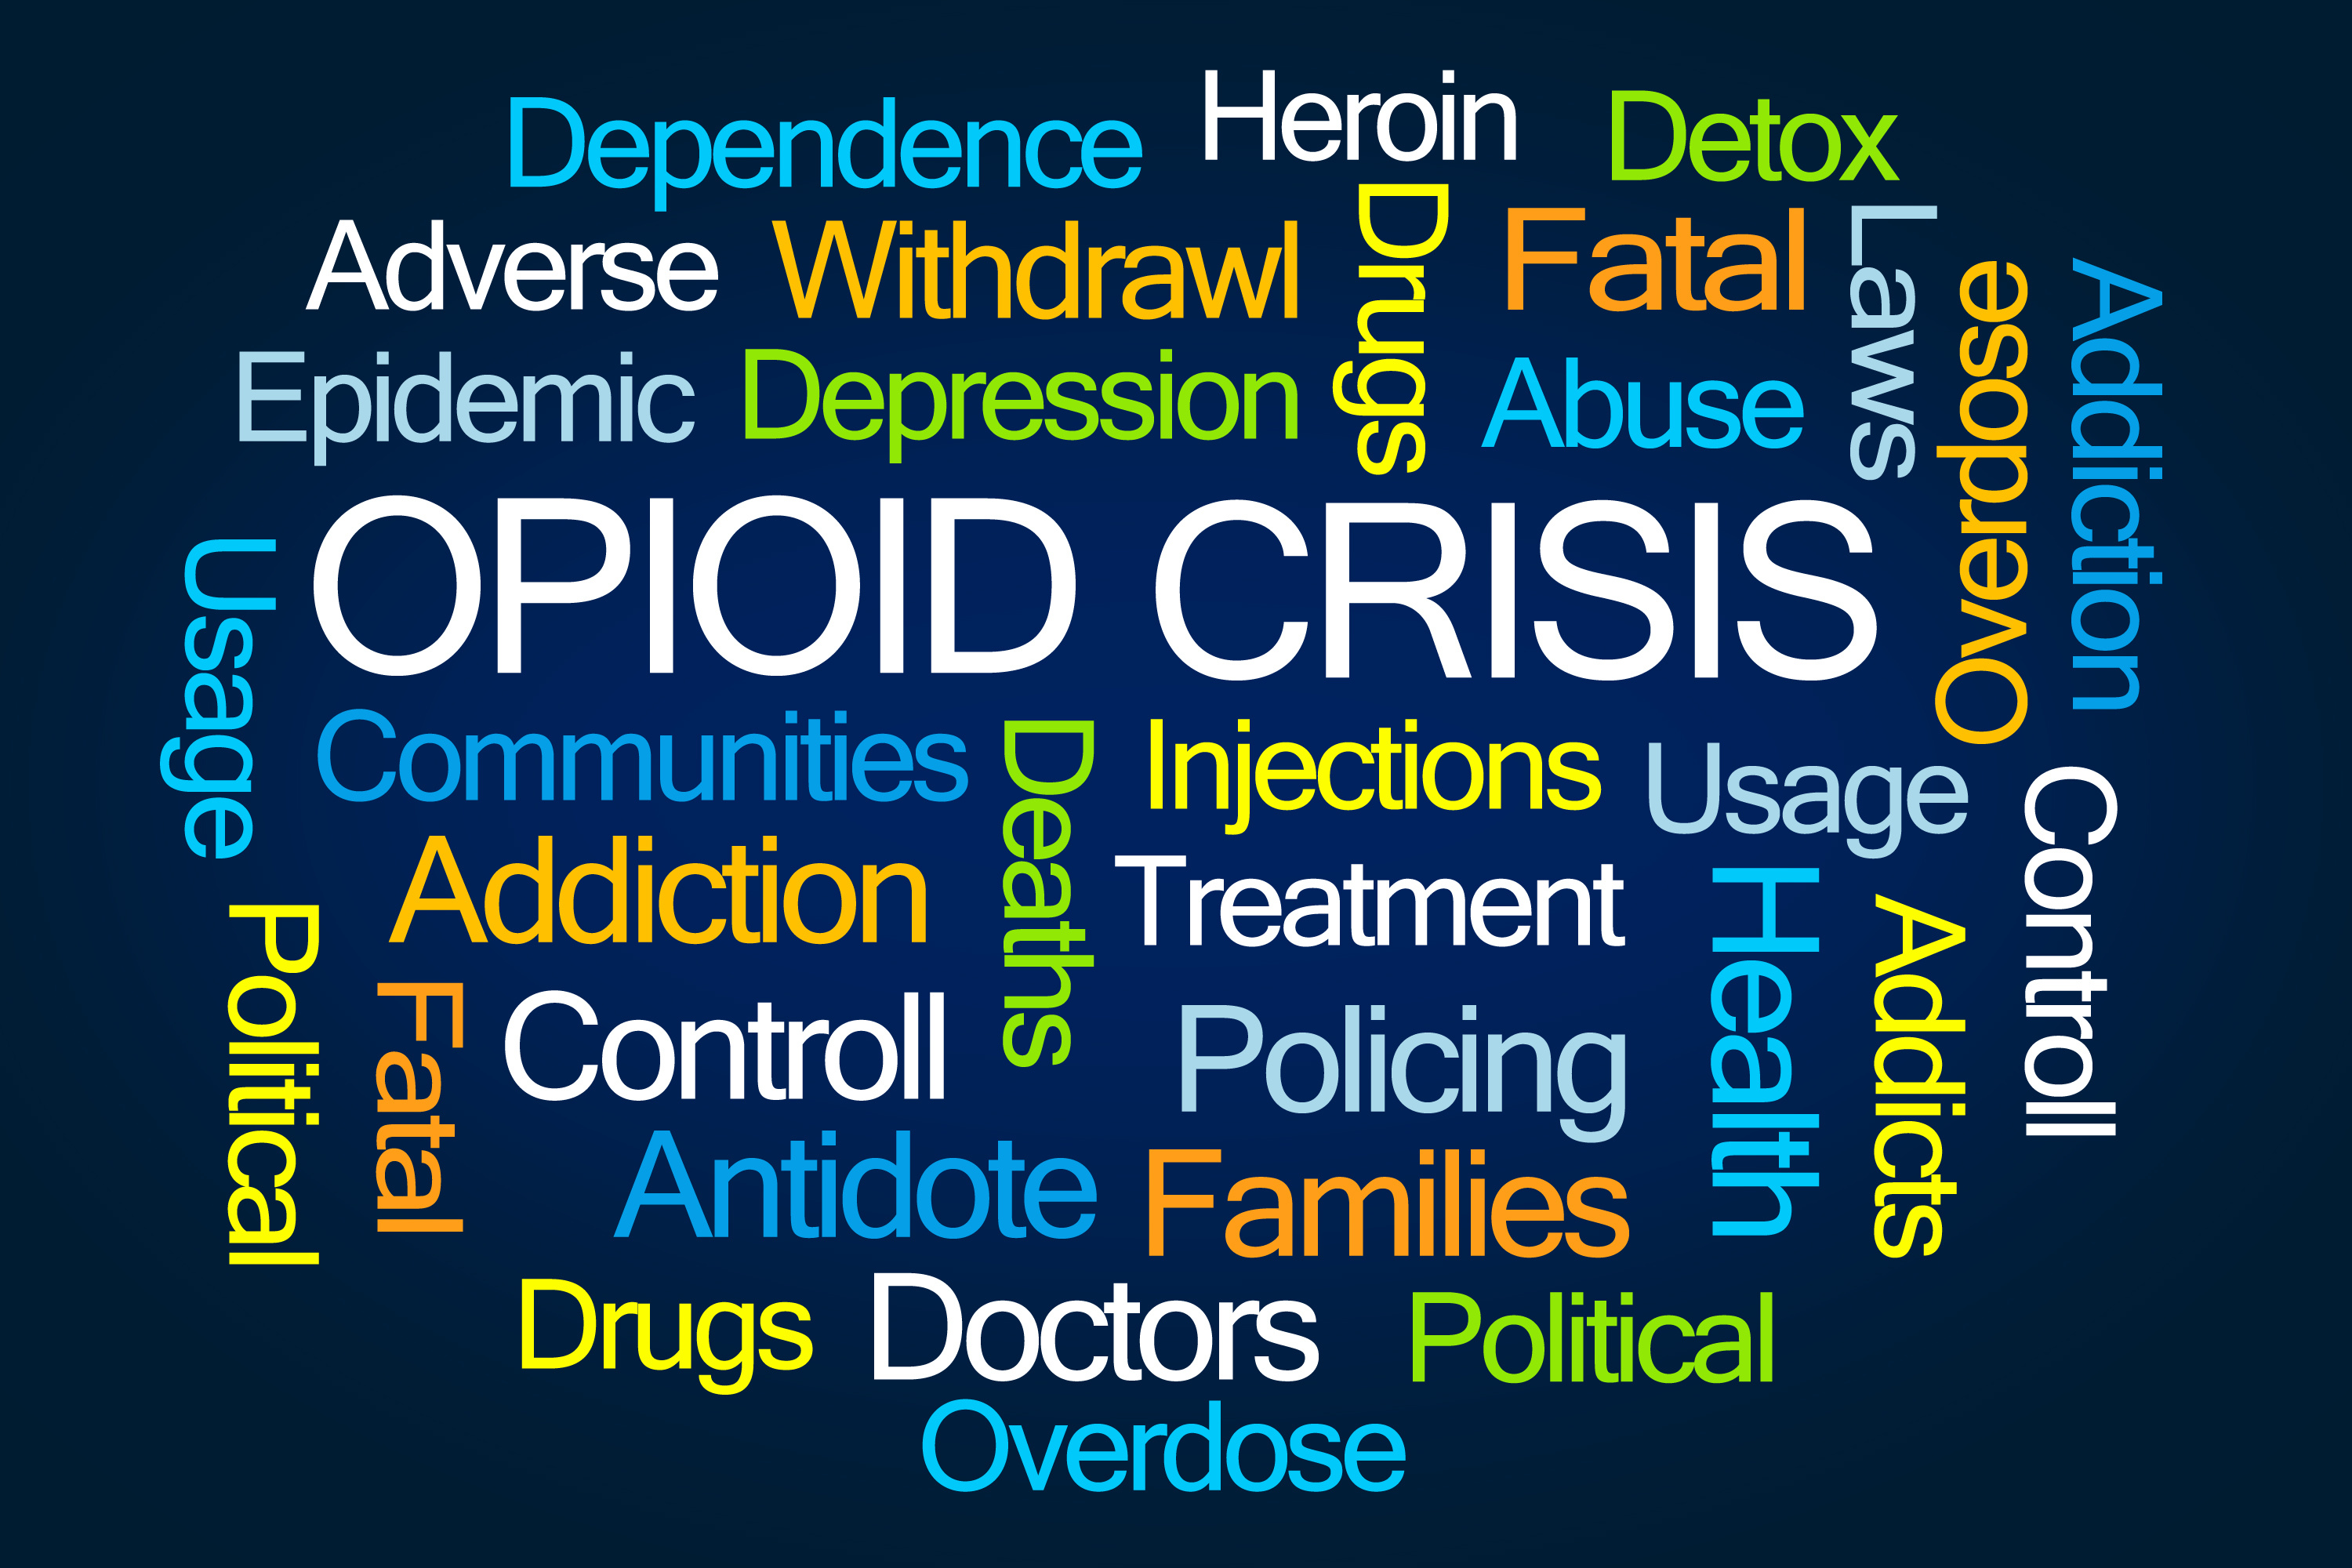 Resources from HHS on opioid addiction and overdose prevention